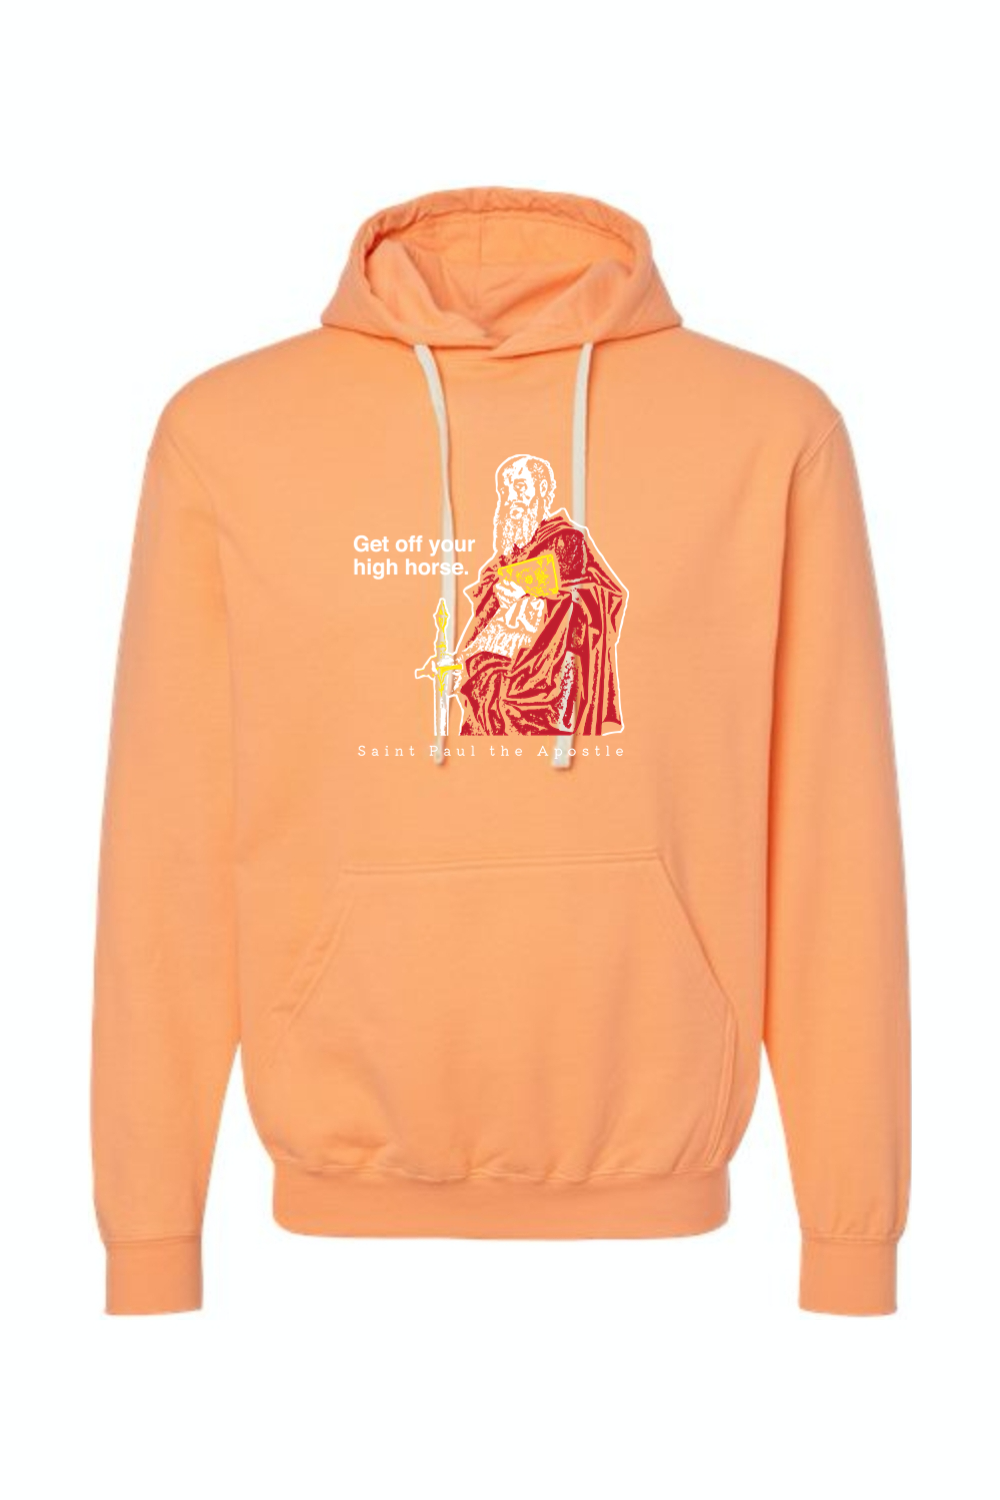 Get Off Your High Horse - St. Paul the Apostle Hoodie Sweatshirt